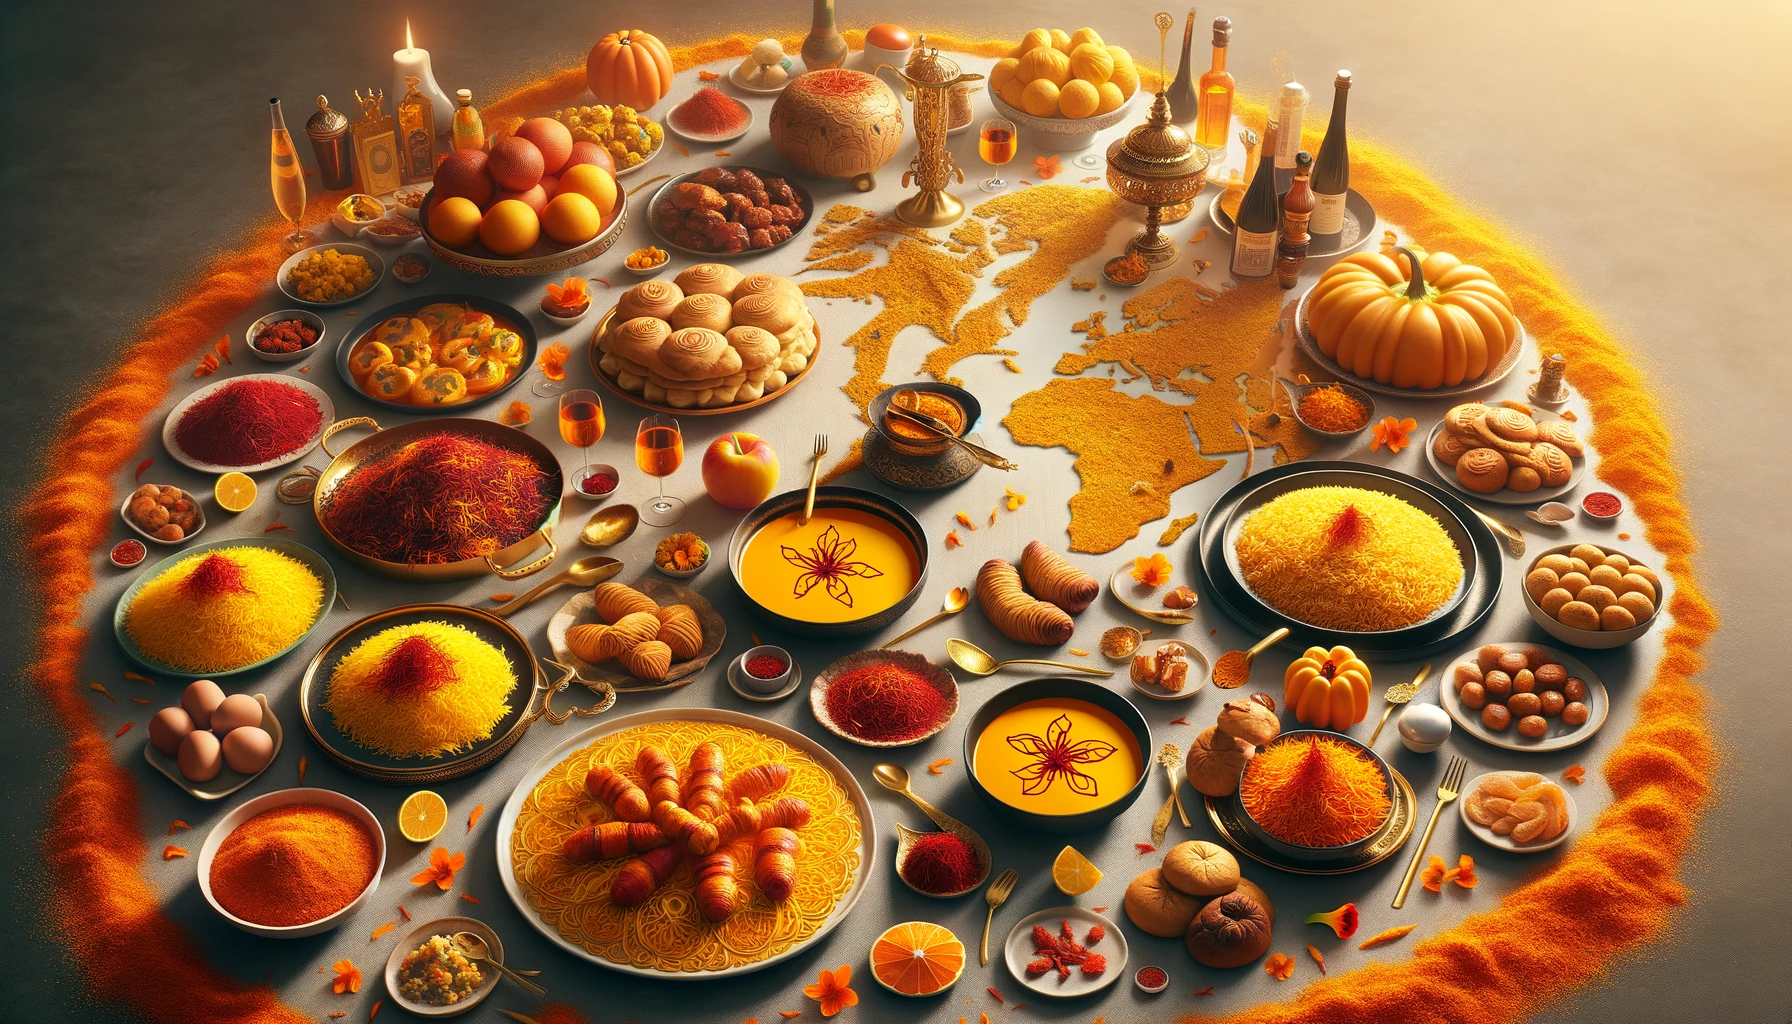 Artistic illustration of various cuisines of the world that utilize red24 saffron laid out in a decorative manner on top of a world map, surrounded by various forms of the spice.